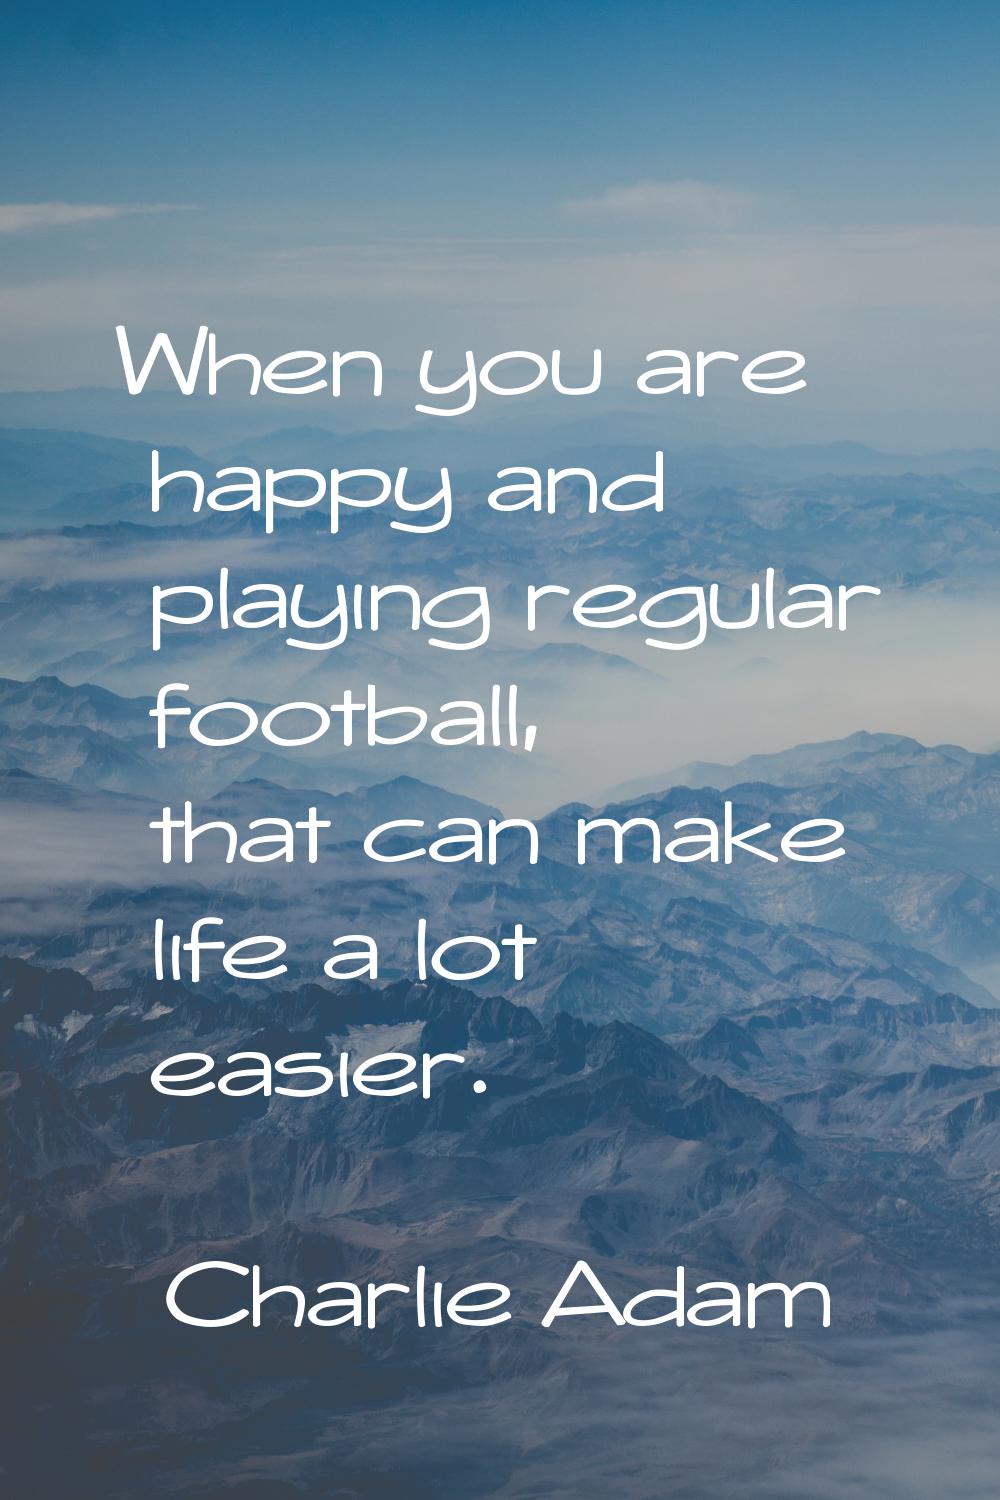 When you are happy and playing regular football, that can make life a lot easier.